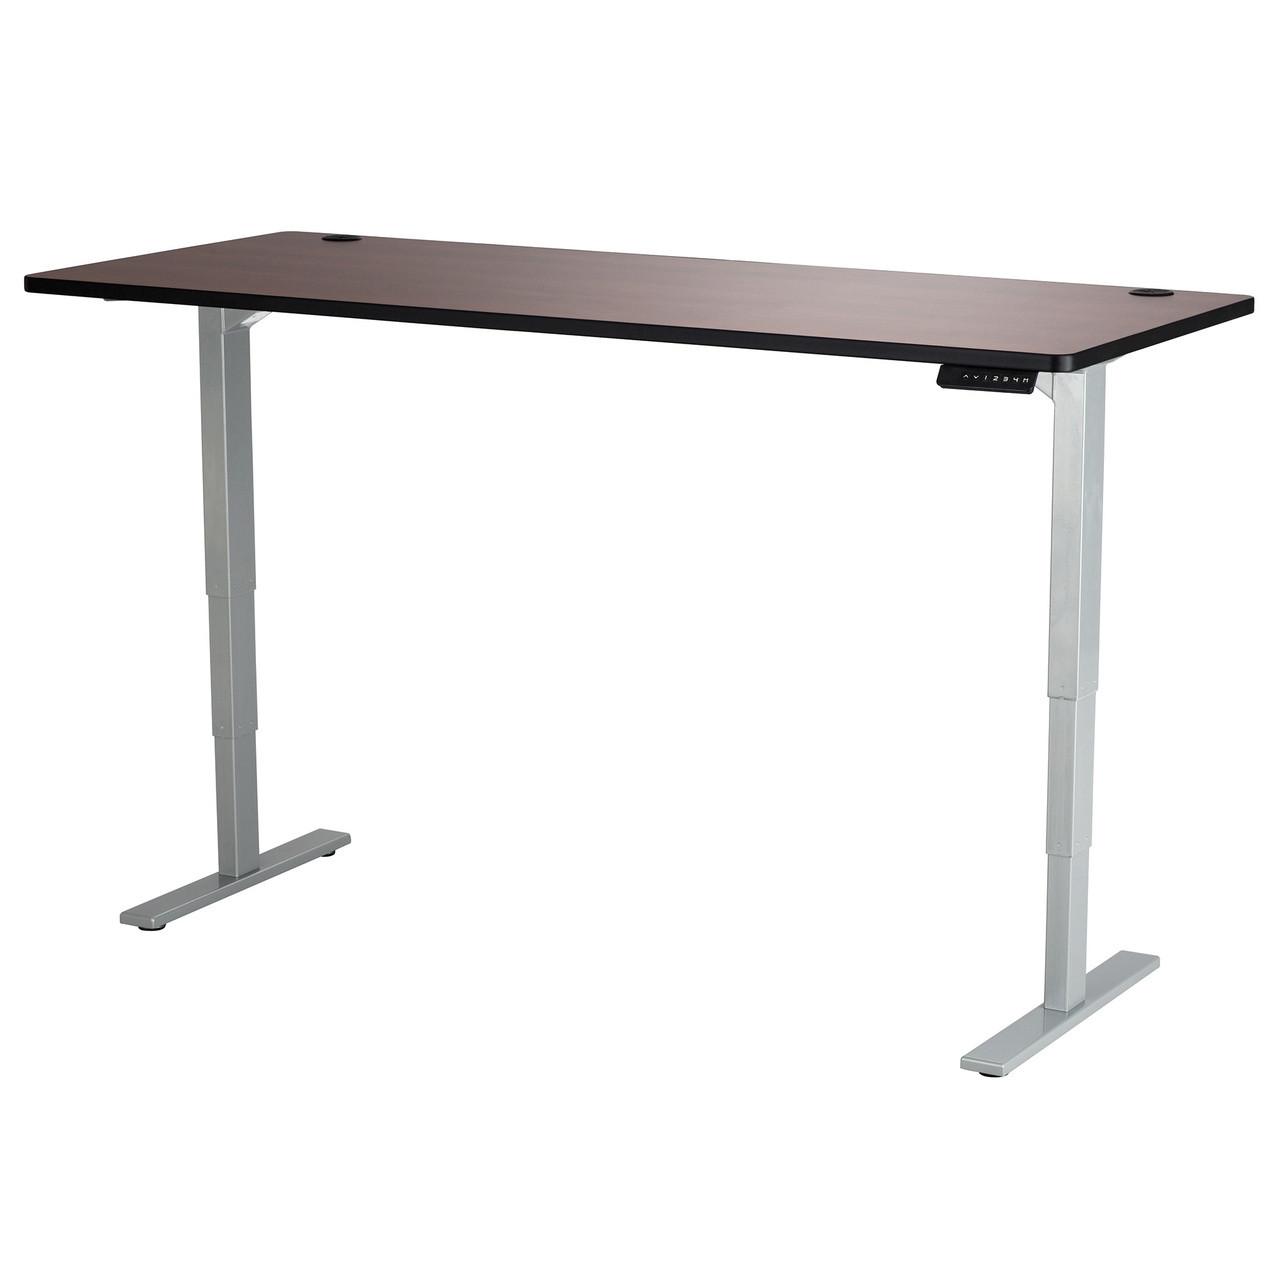 72 x 30" Top for Height-Adjustable Table